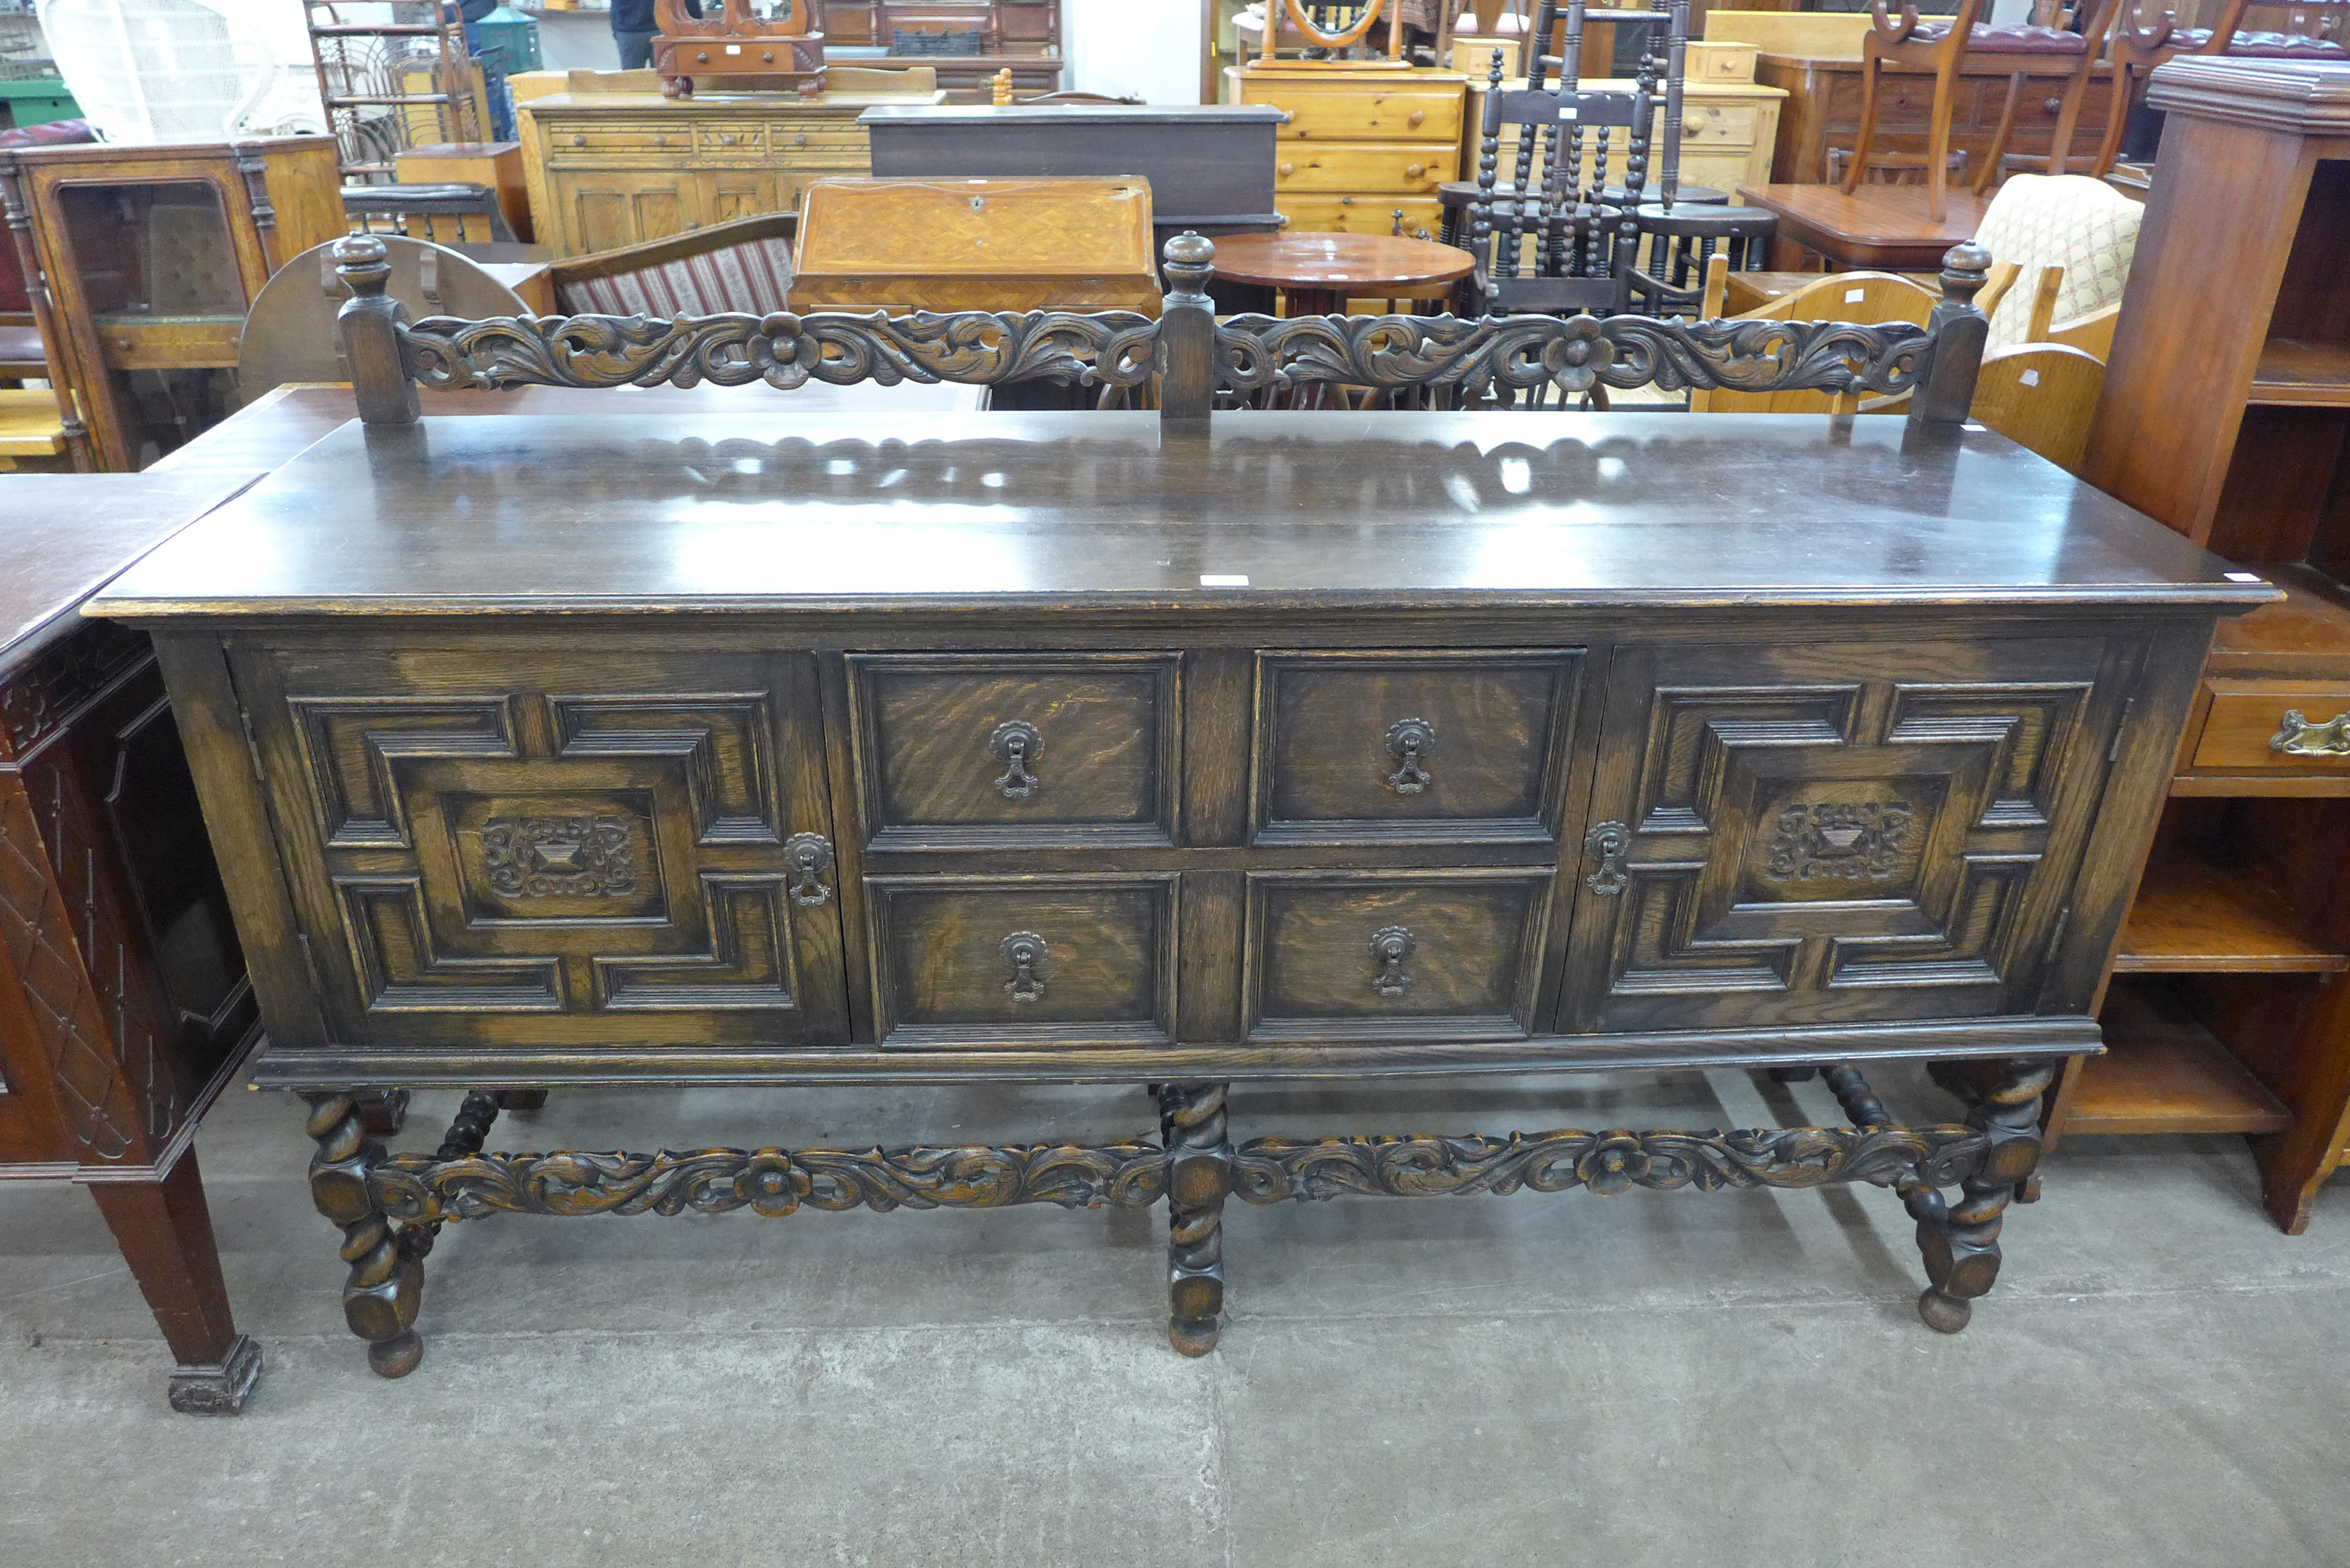 An early 20th century Jacobean Revival carved oak geometric moulded barleytwist sideboard - Image 2 of 2